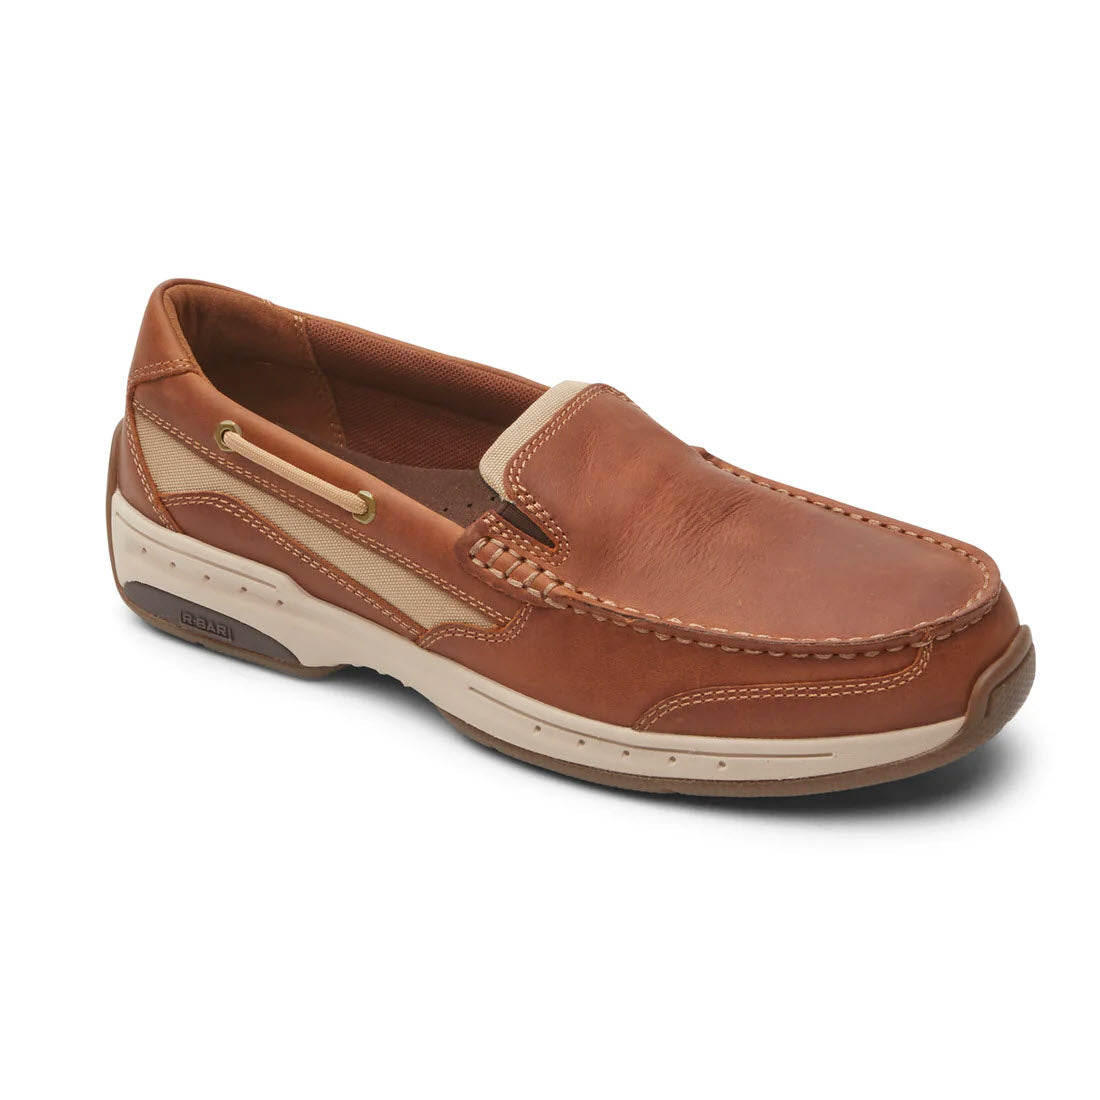 A single Dunham Captain Venetian Tan Leather slip-on boat shoe with white stitching and a rubber sole, displayed on a white background.